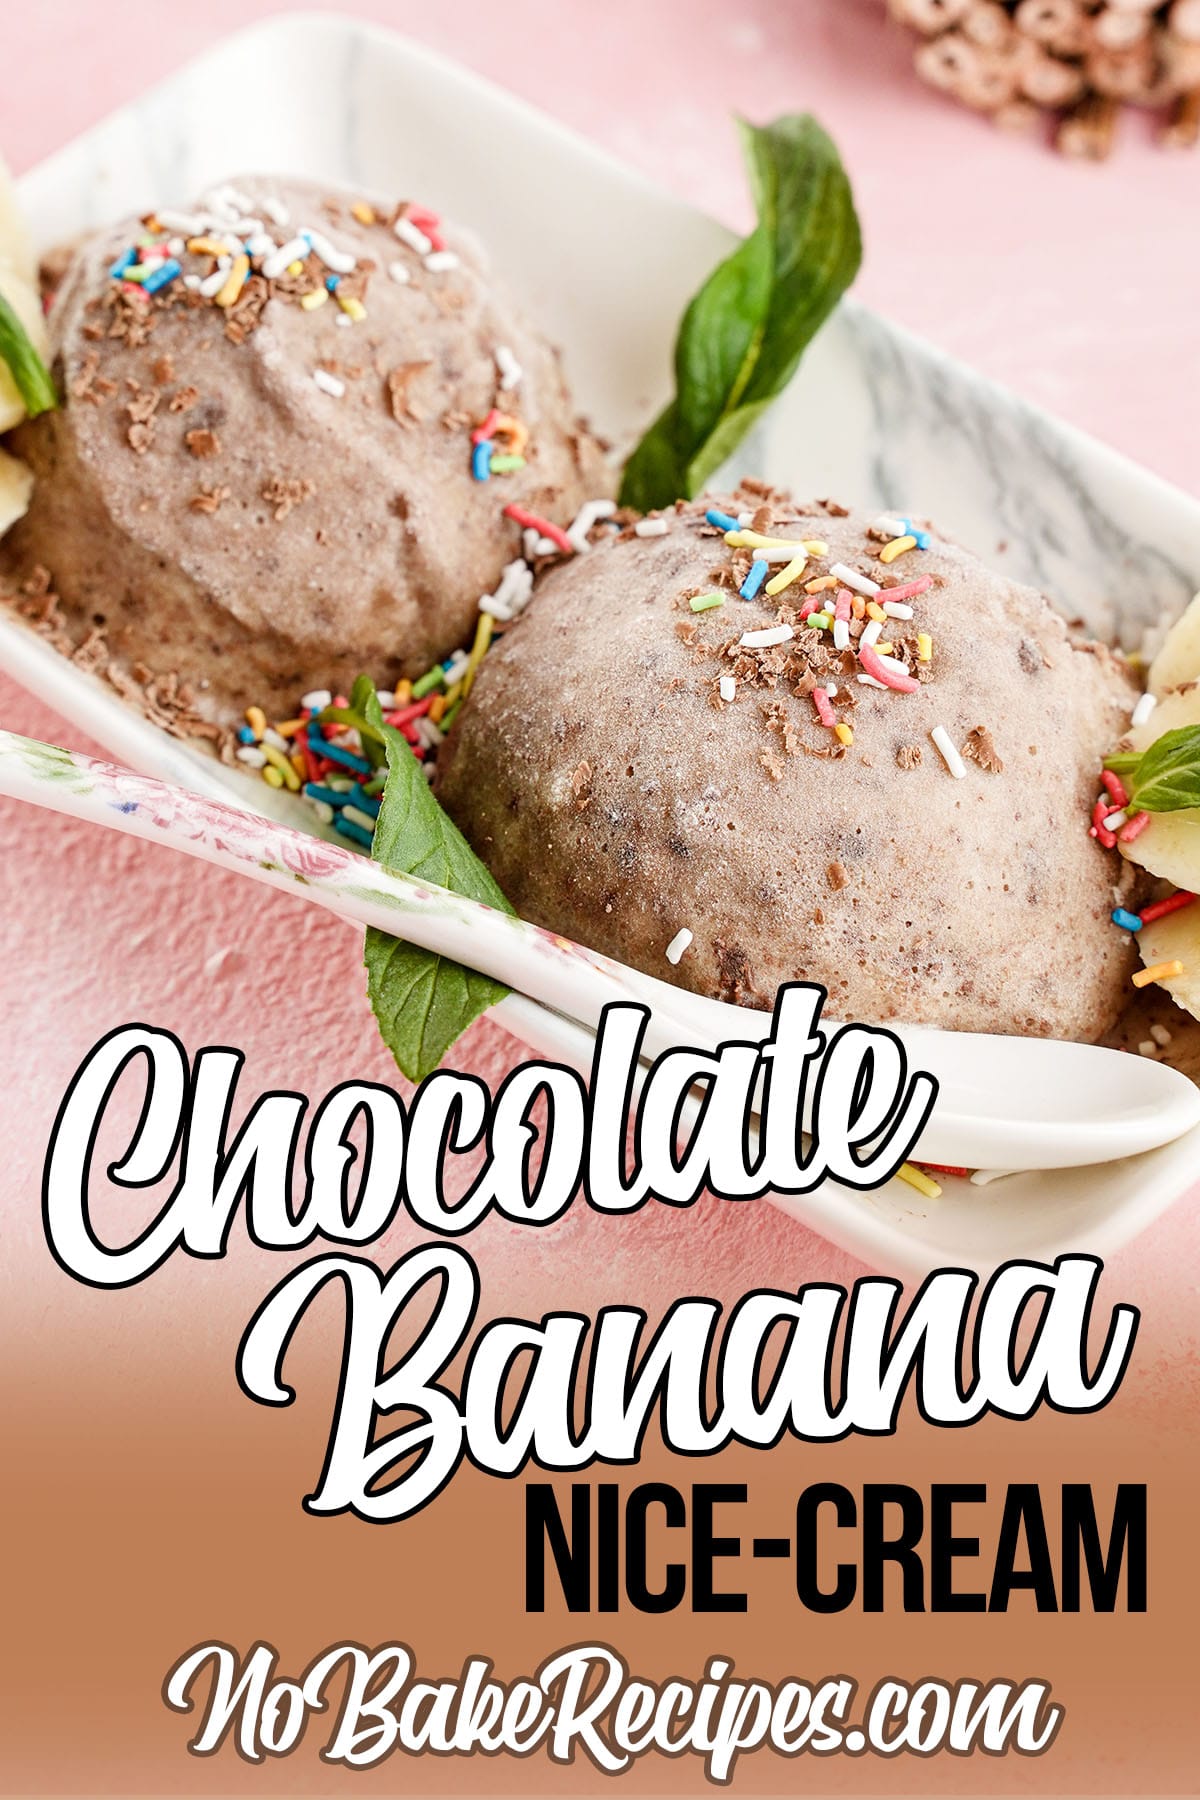 two scoops of banana chocolate nice cream in a bowl with text which reads chocolate banana nice-cream